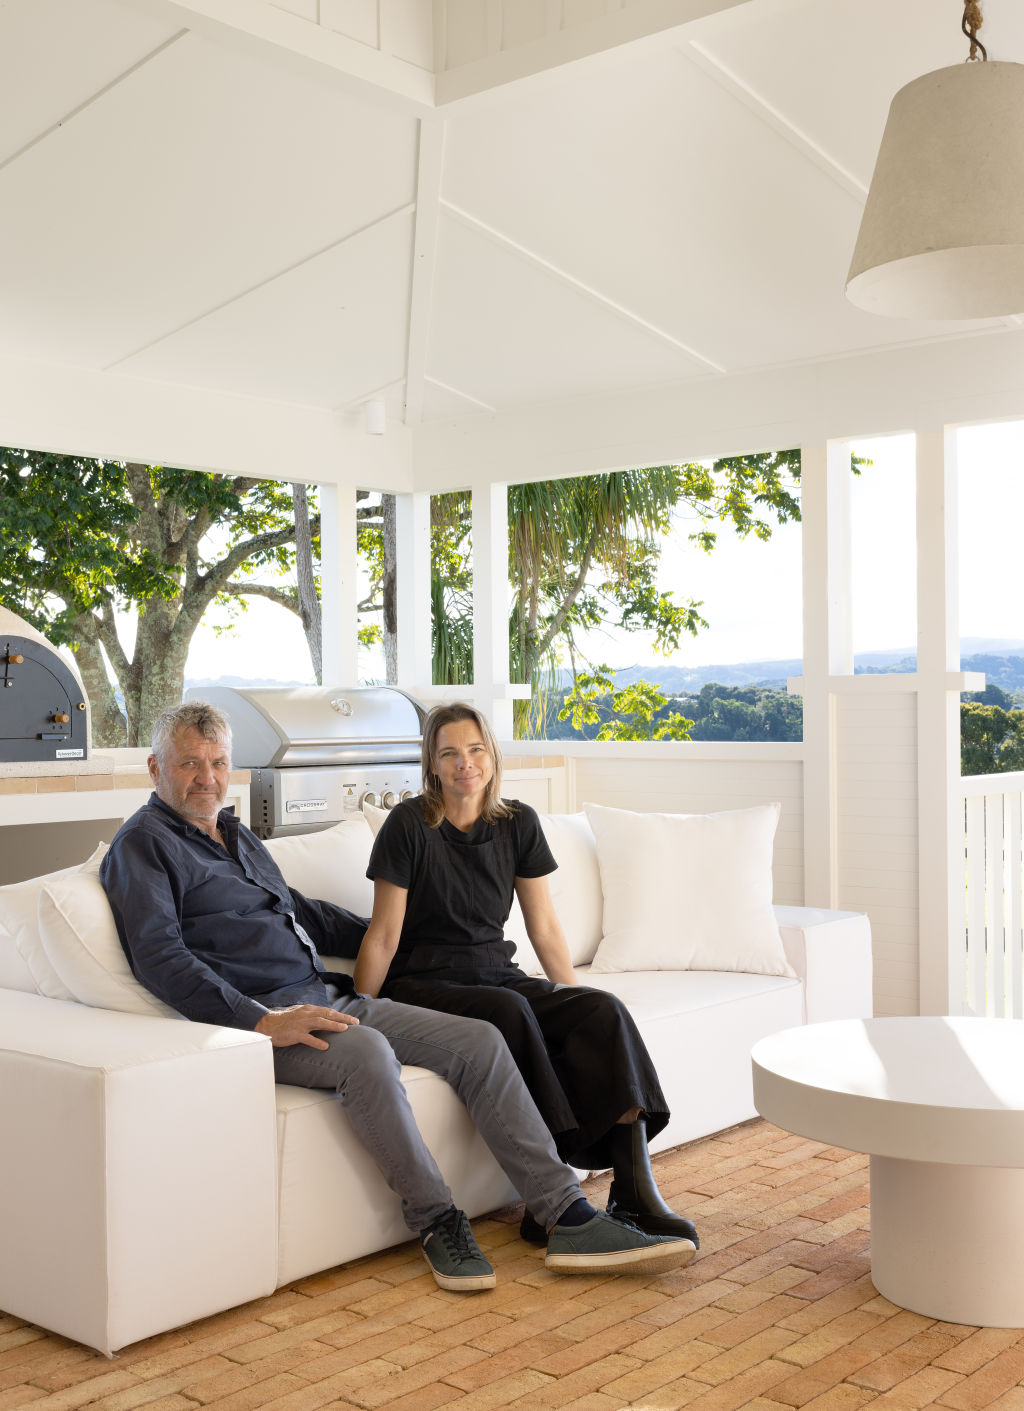 Interior designer Ali Griffiths and her partner, builder Michael Beukers, restored and extended an original 1927 Queenslander in the Byron Bay hinterland. Photo: Louise Roche - The Design Villa